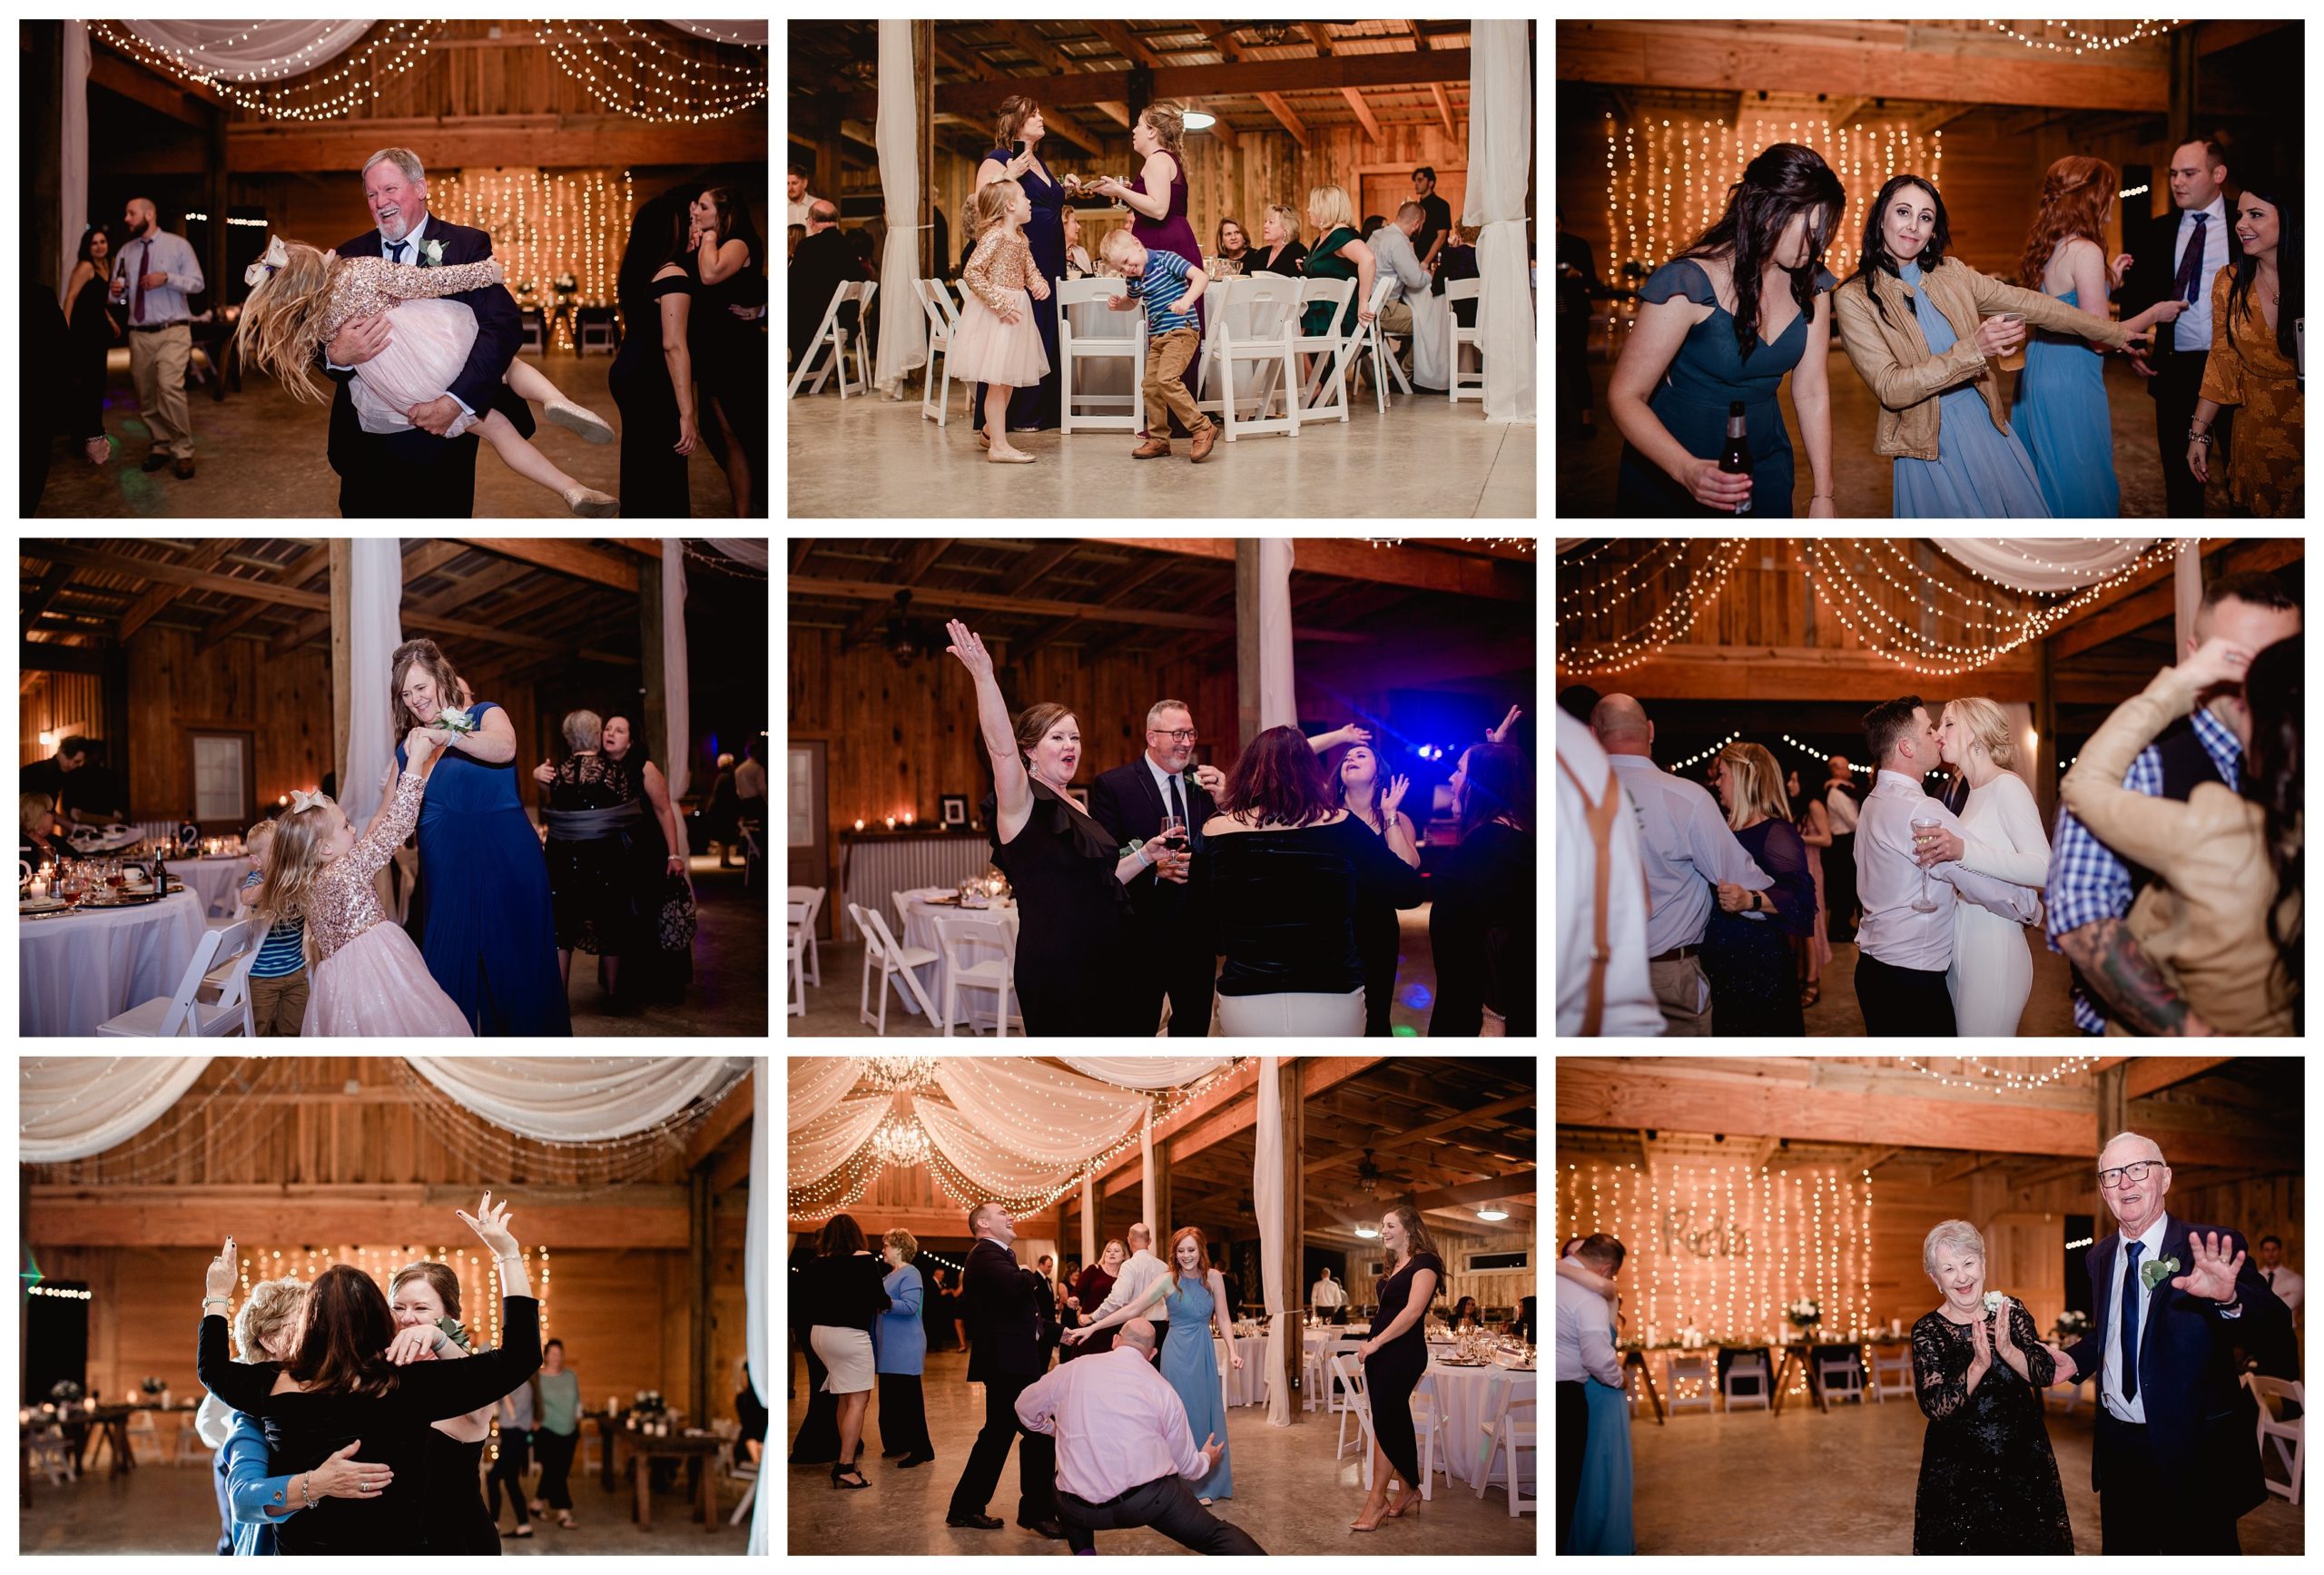 Barn wedding Reception pictures taken at Clark Plantation - Shelly Williams Photography